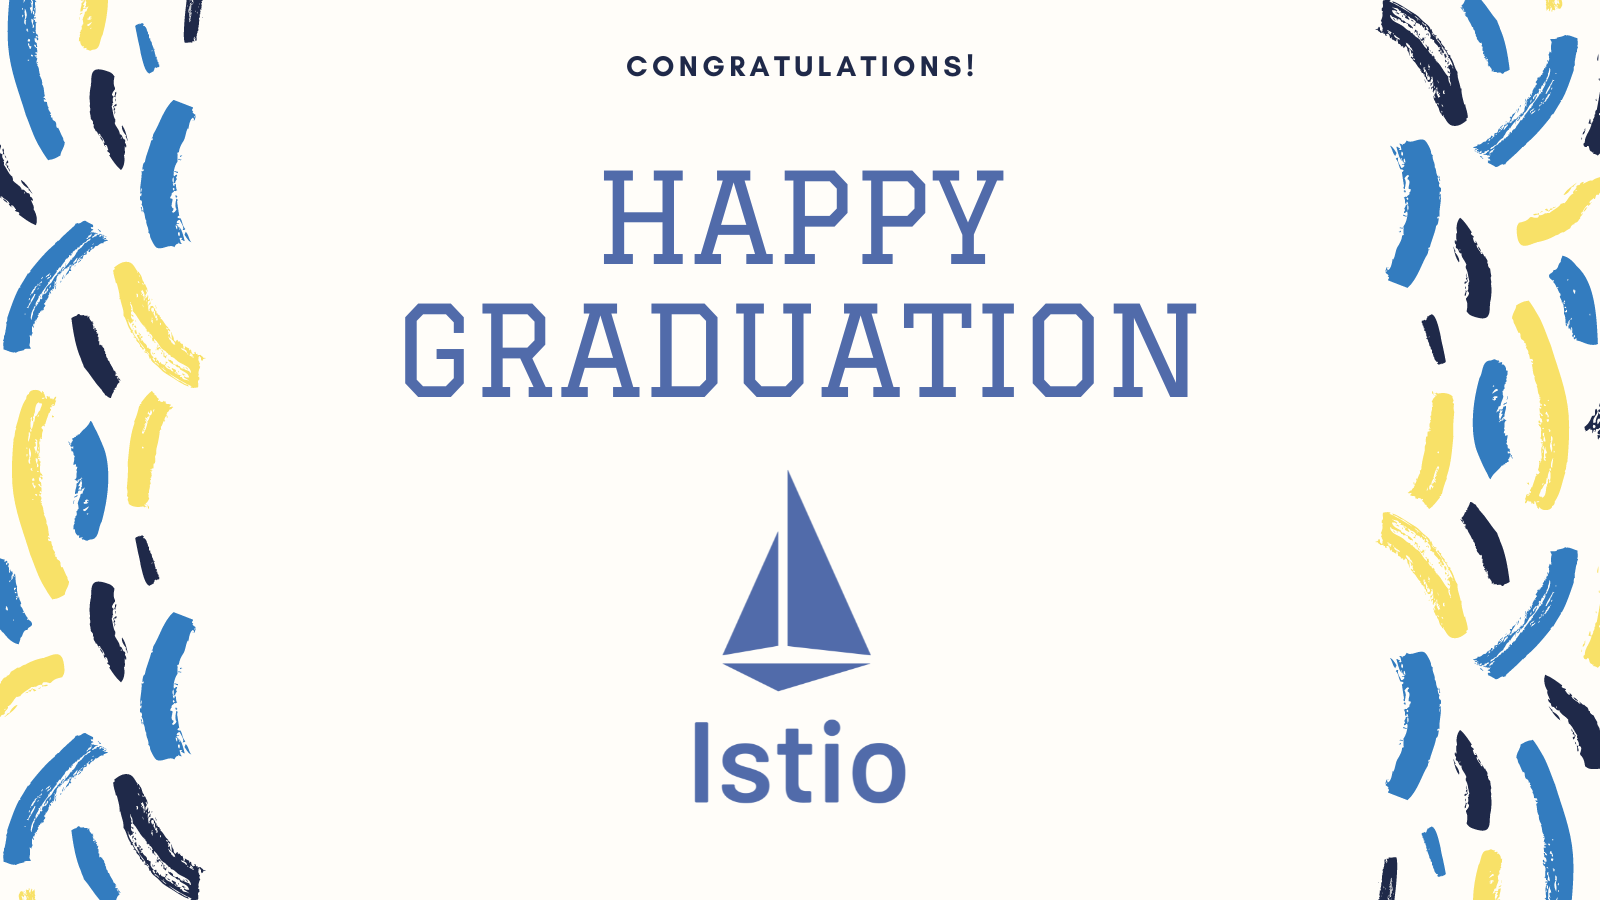 My Journey with Istio: From Incubation to Graduation